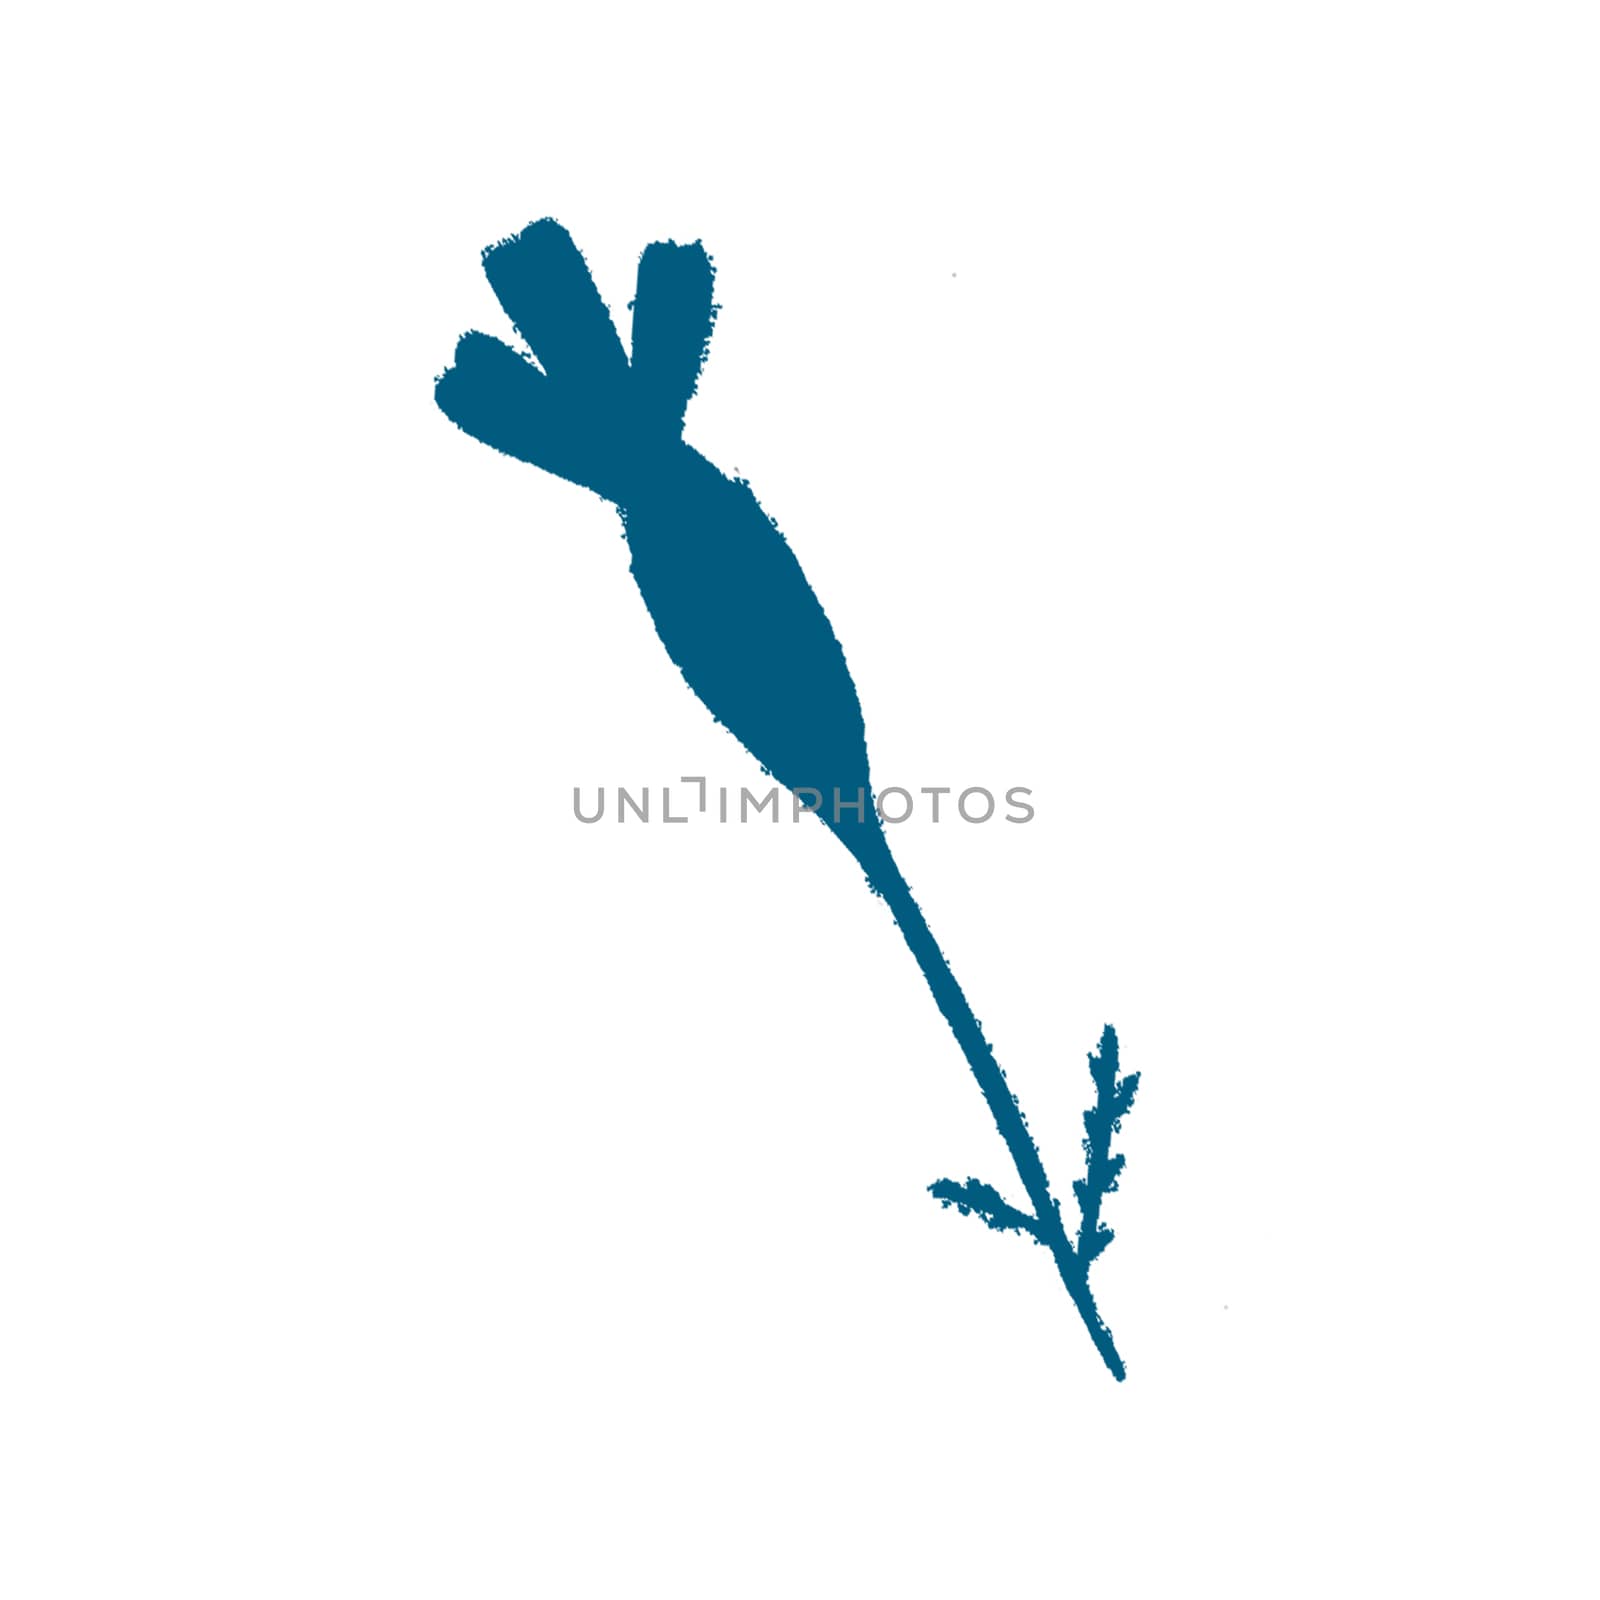 Blue Hand-Drawn Isolated Flower Silhouette. Monochrome Botanical Plant Illustration in Sketch Style. Thin-leaved Marigolds for Print, Tattoo, Design, Holiday, Wedding and Birthday Card.